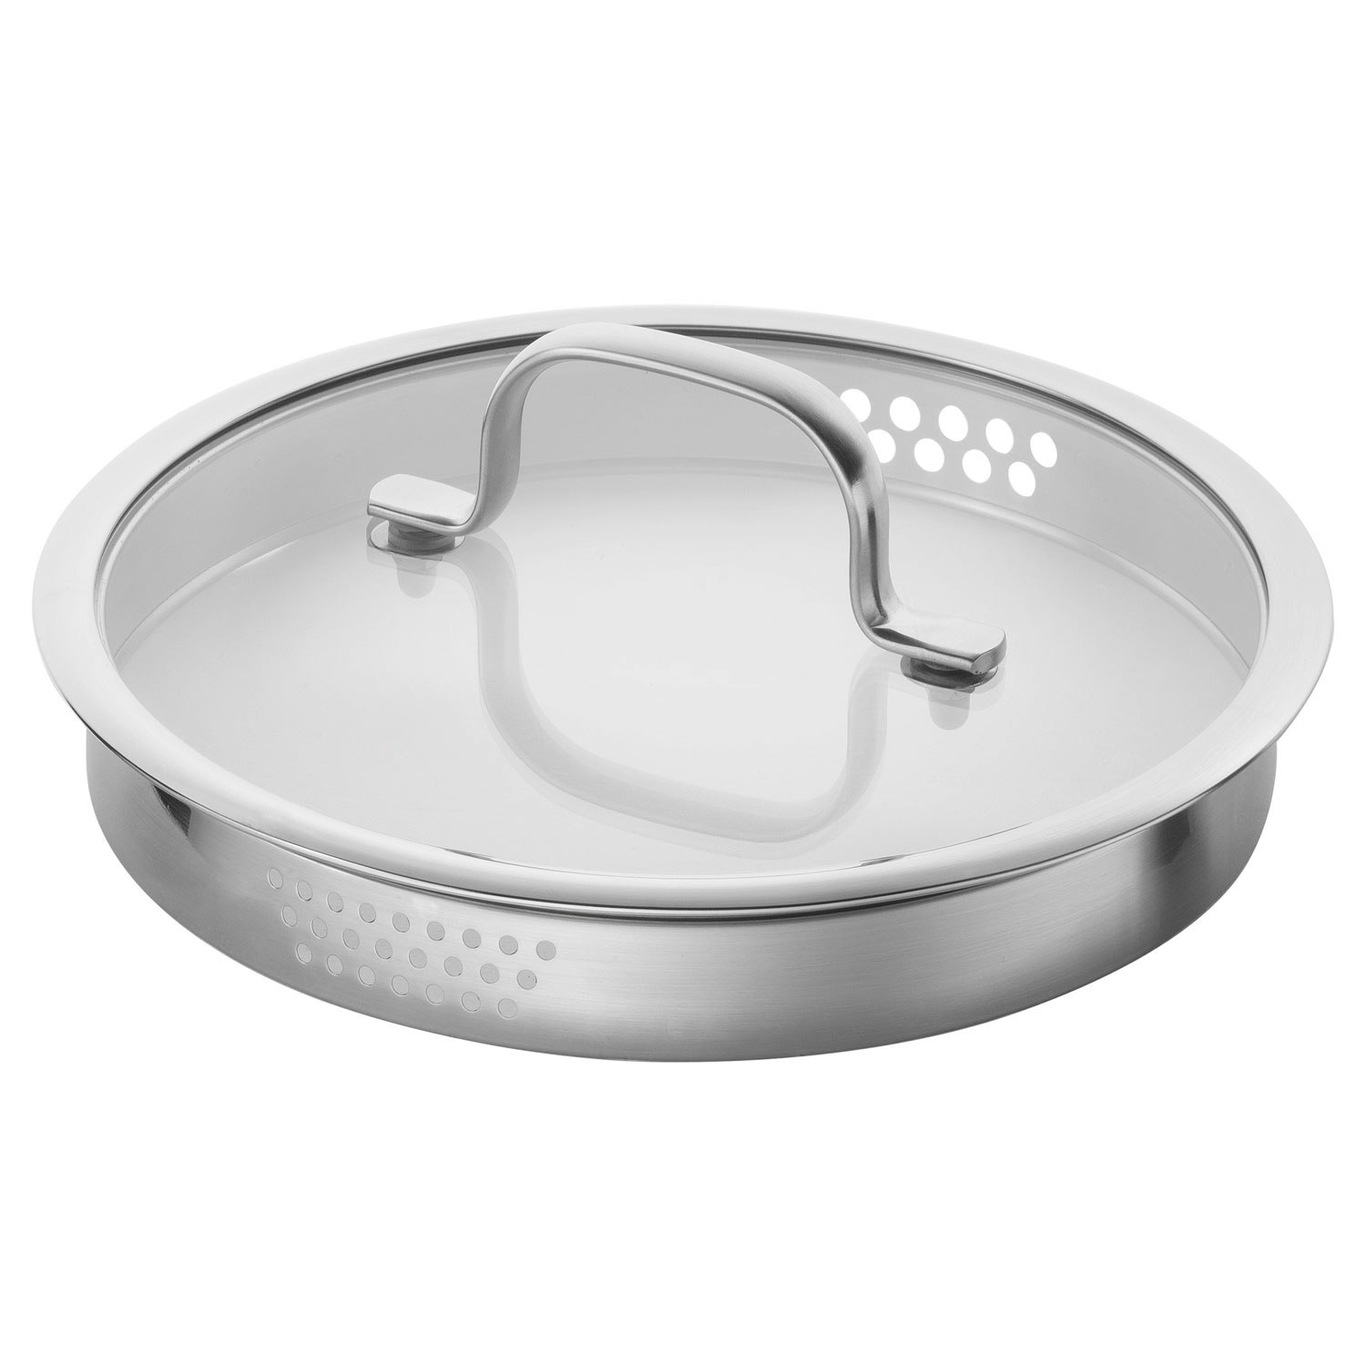 https://royaldesign.com/image/2/zwilling-true-flow-pot-set-stainless-steel-3-pieces-1?w=800&quality=80